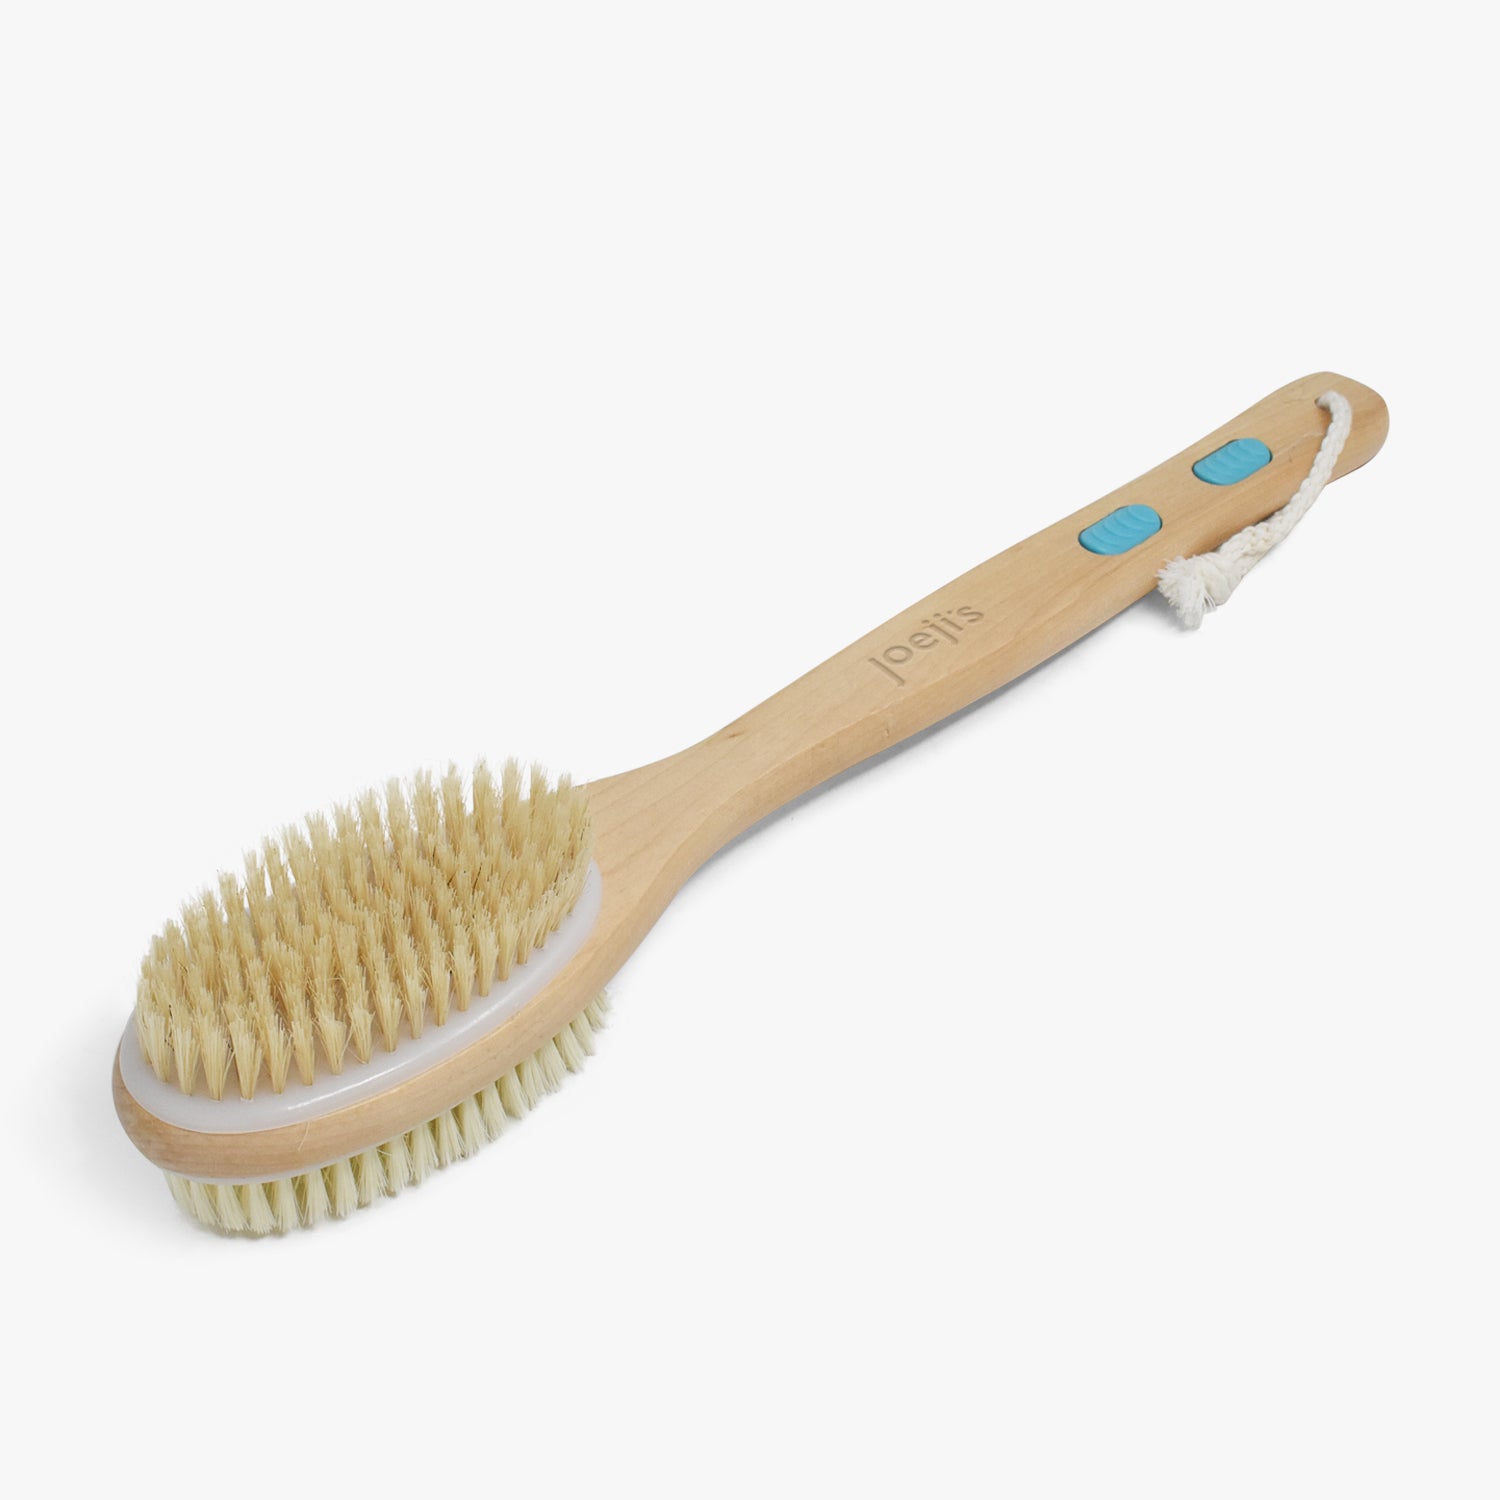 JOW 4 in 1 Detachable 180 Degree Foldable Shower Scrubber Brush for Cleaning ASA